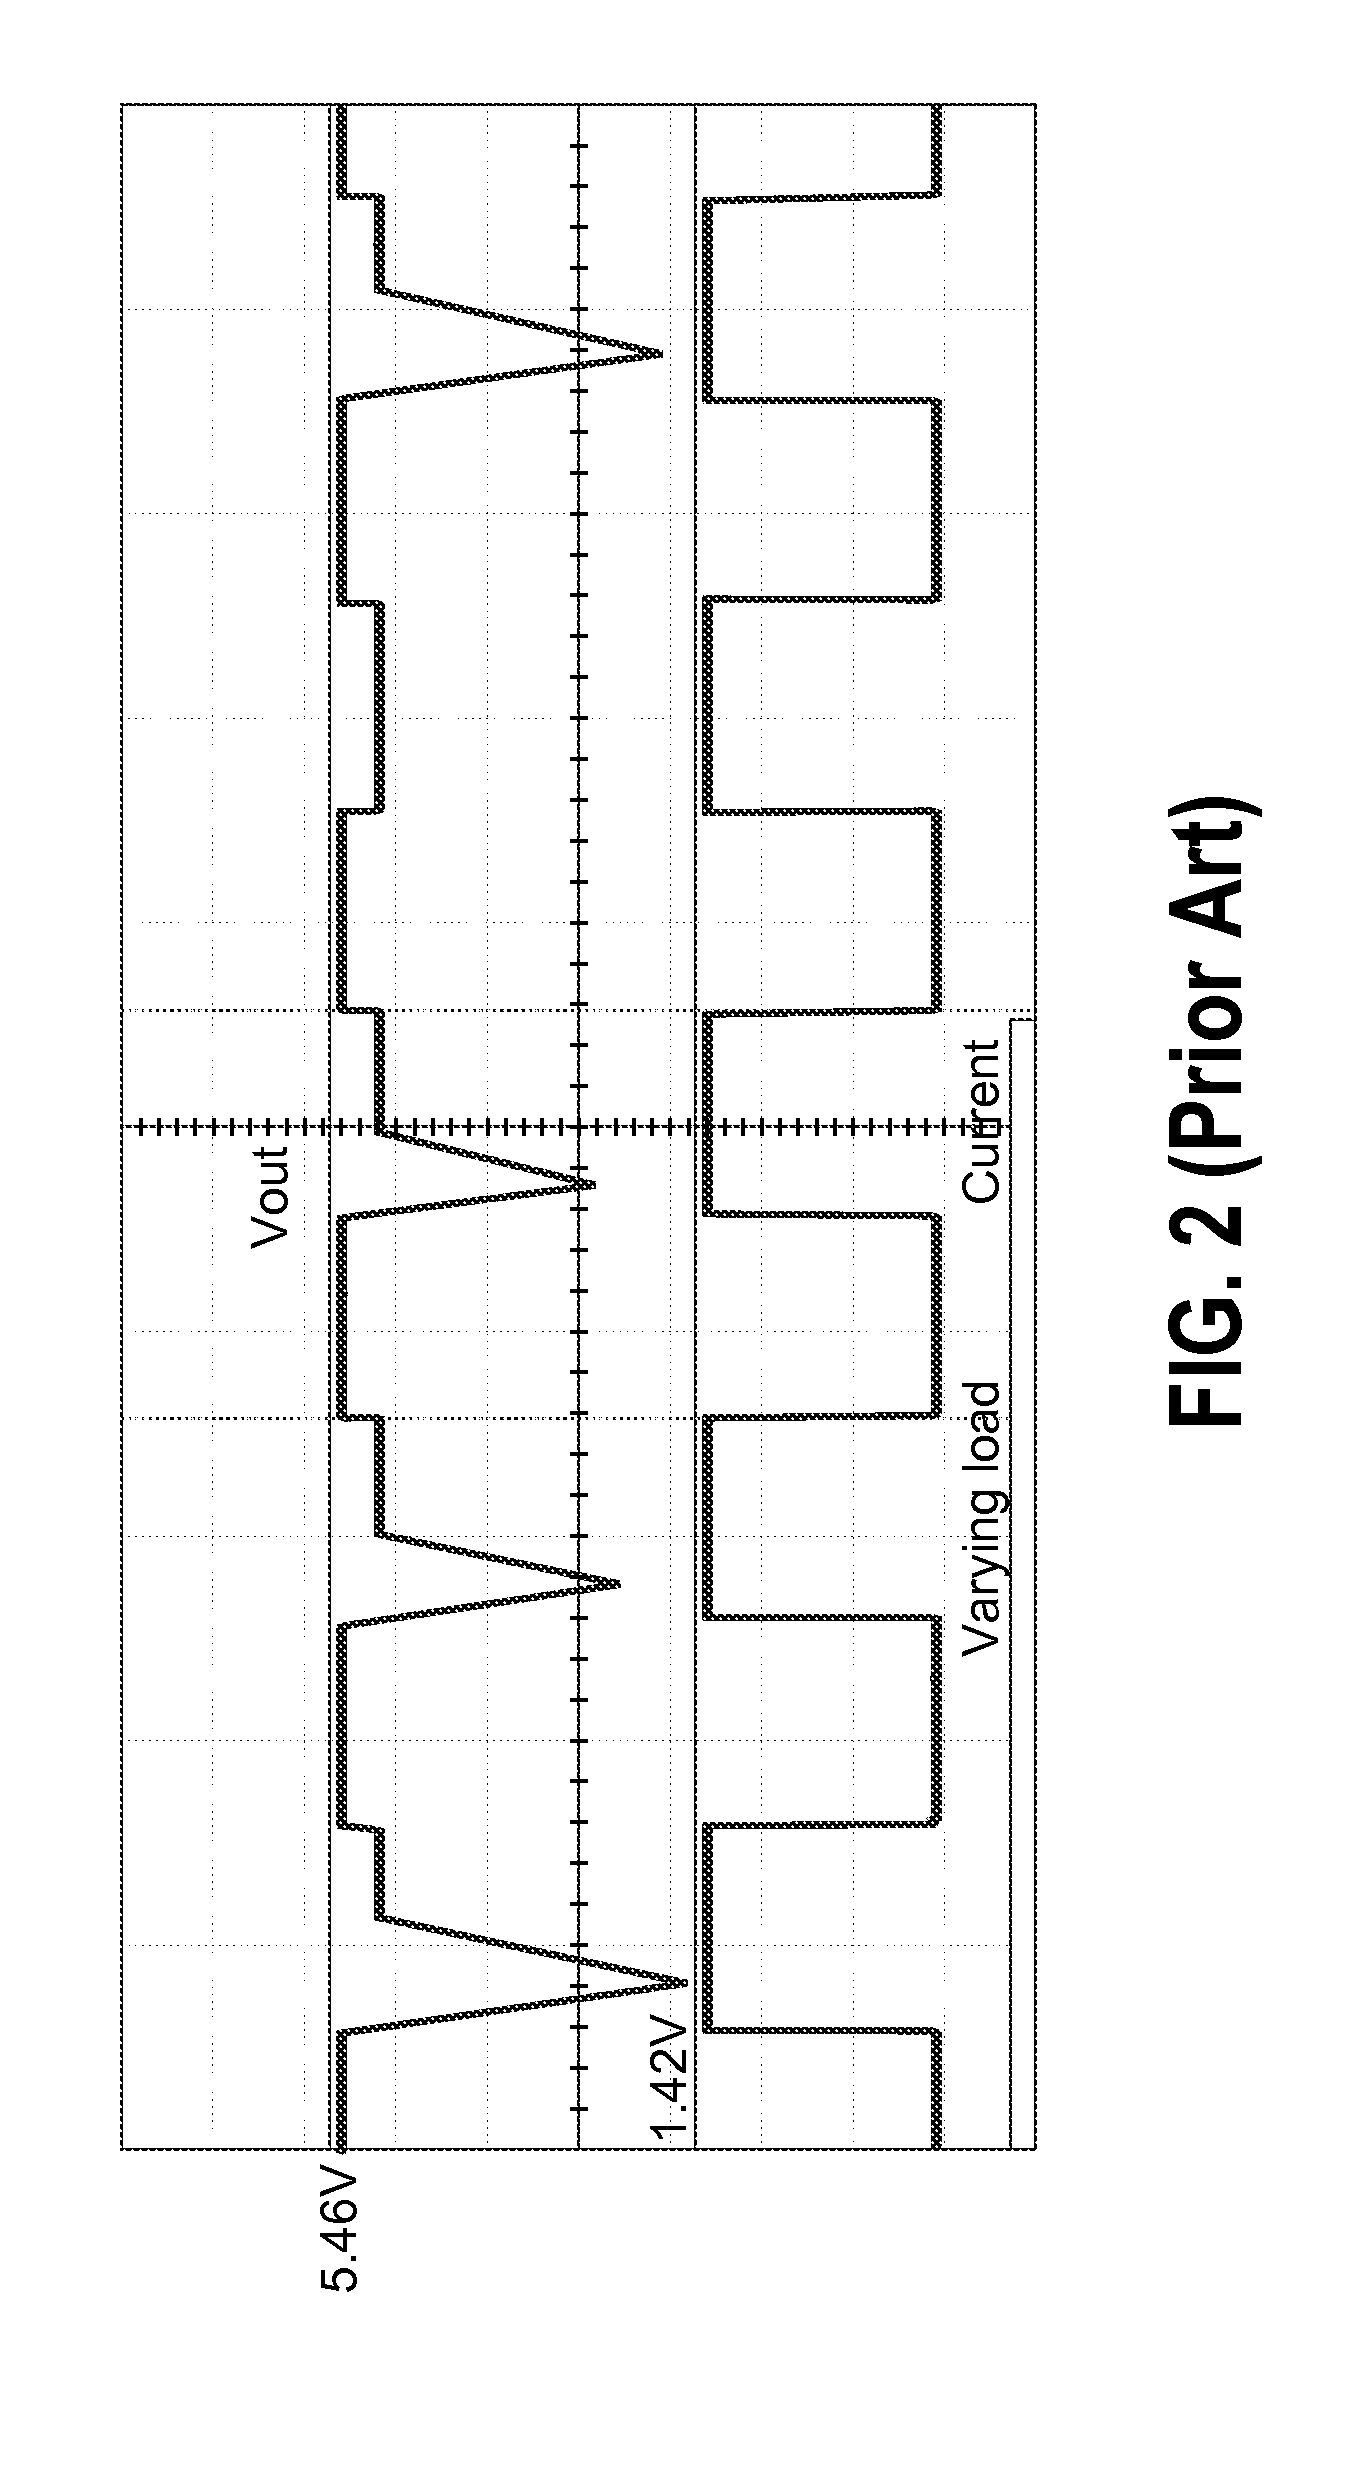 Control circuits and methods for switching mode power supplies